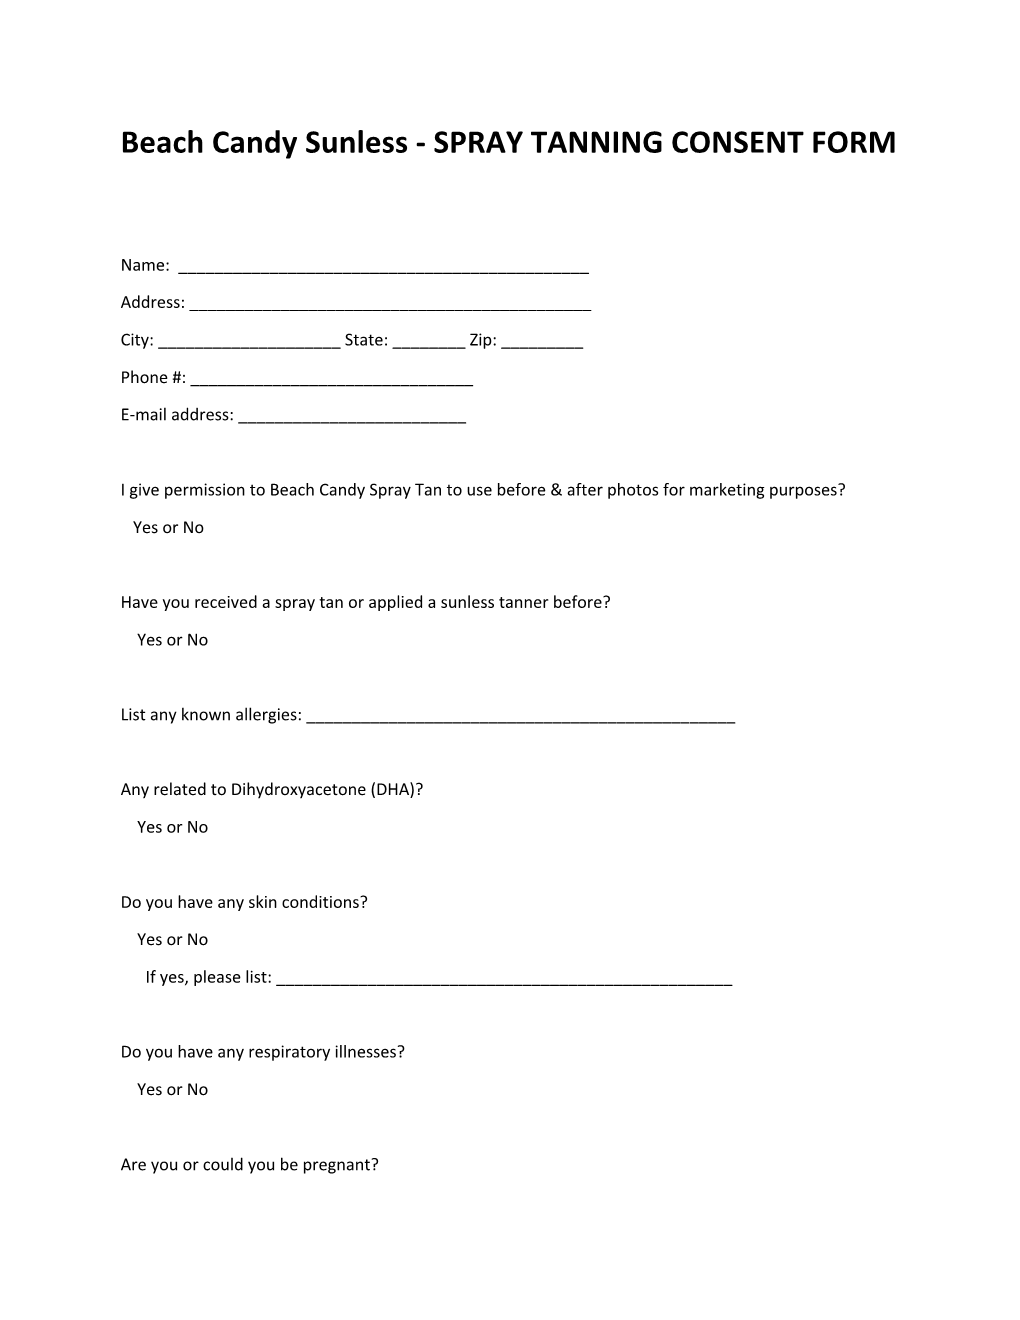 Beach Candy Sunless - SPRAY TANNING CONSENT FORM